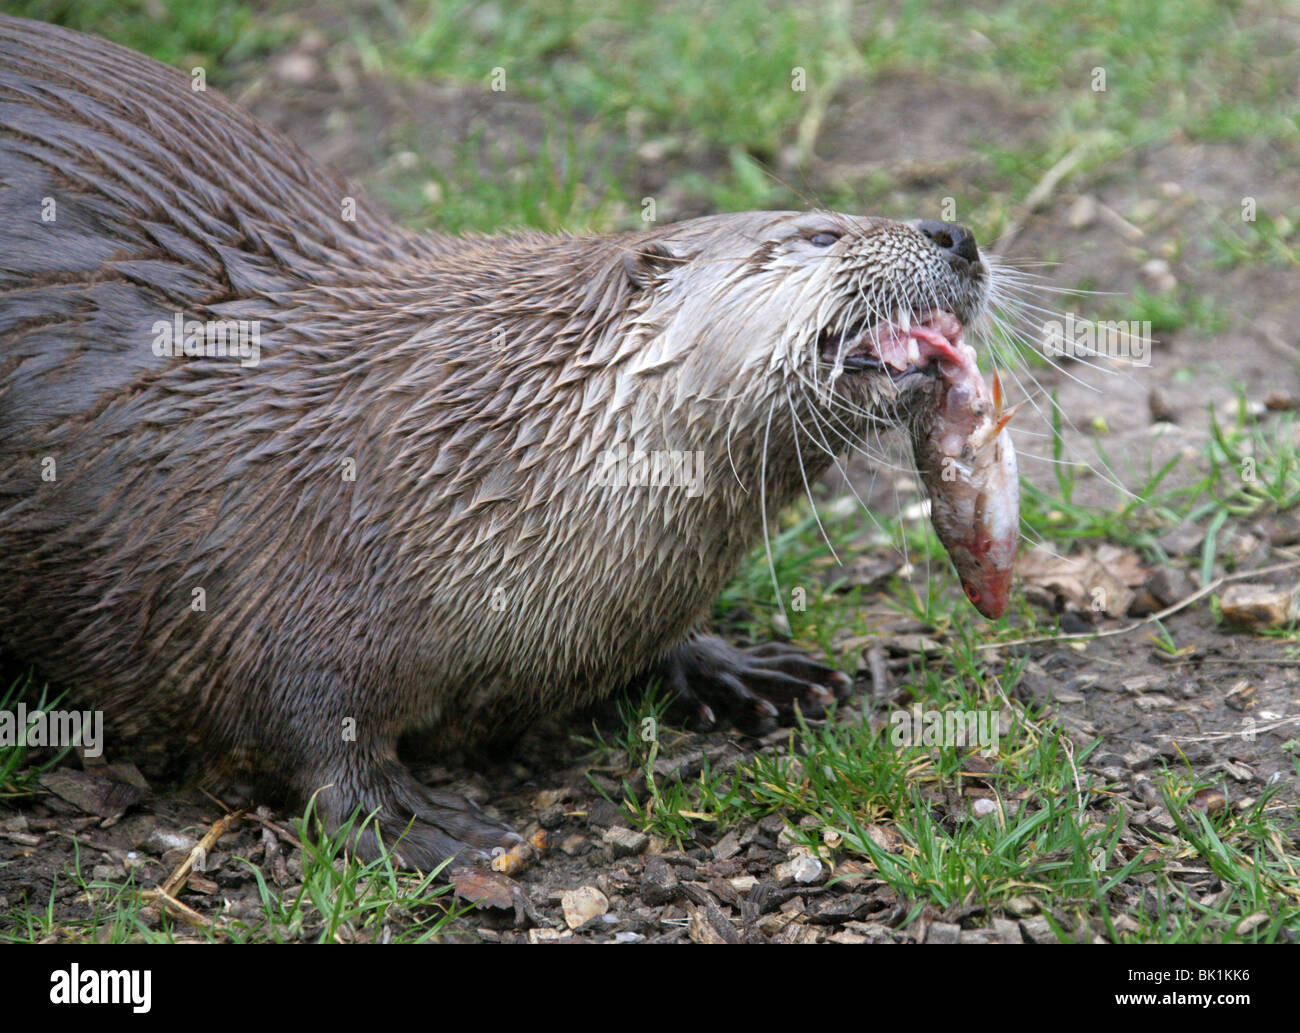 North American River Otter, Lontra canadensis, Mustelidae, North America and Canada Stock Photo